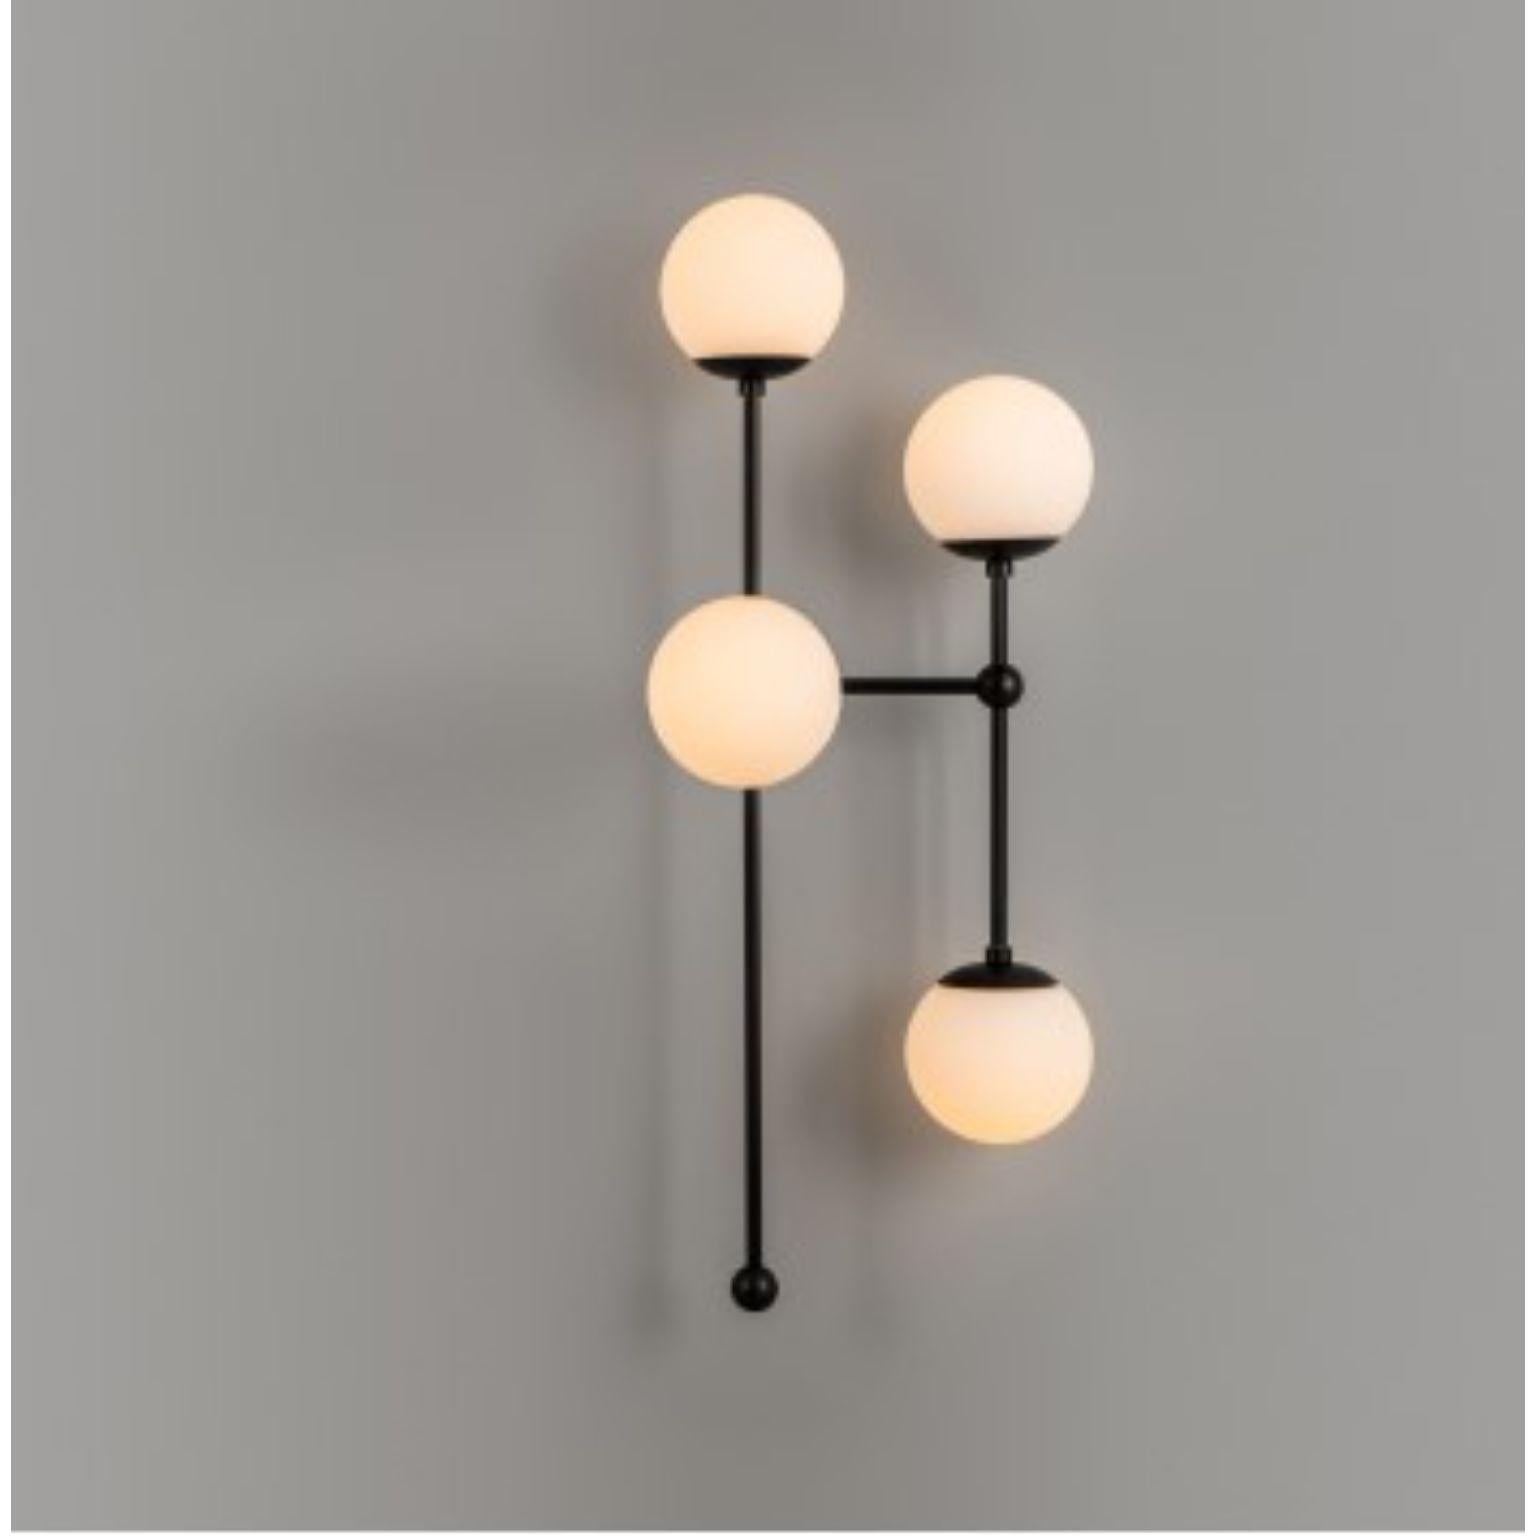 Armstrong 4 R wall sconce by Schwung
Dimensions: W 35 x D 33 x H 92 cm
Materials: Brass, opal glass
Weight: 6 kg

Finishes available: Black gunmetal, polished nickel, brass
Other sizes available.

 Schwung is a german word, and loosely defined,